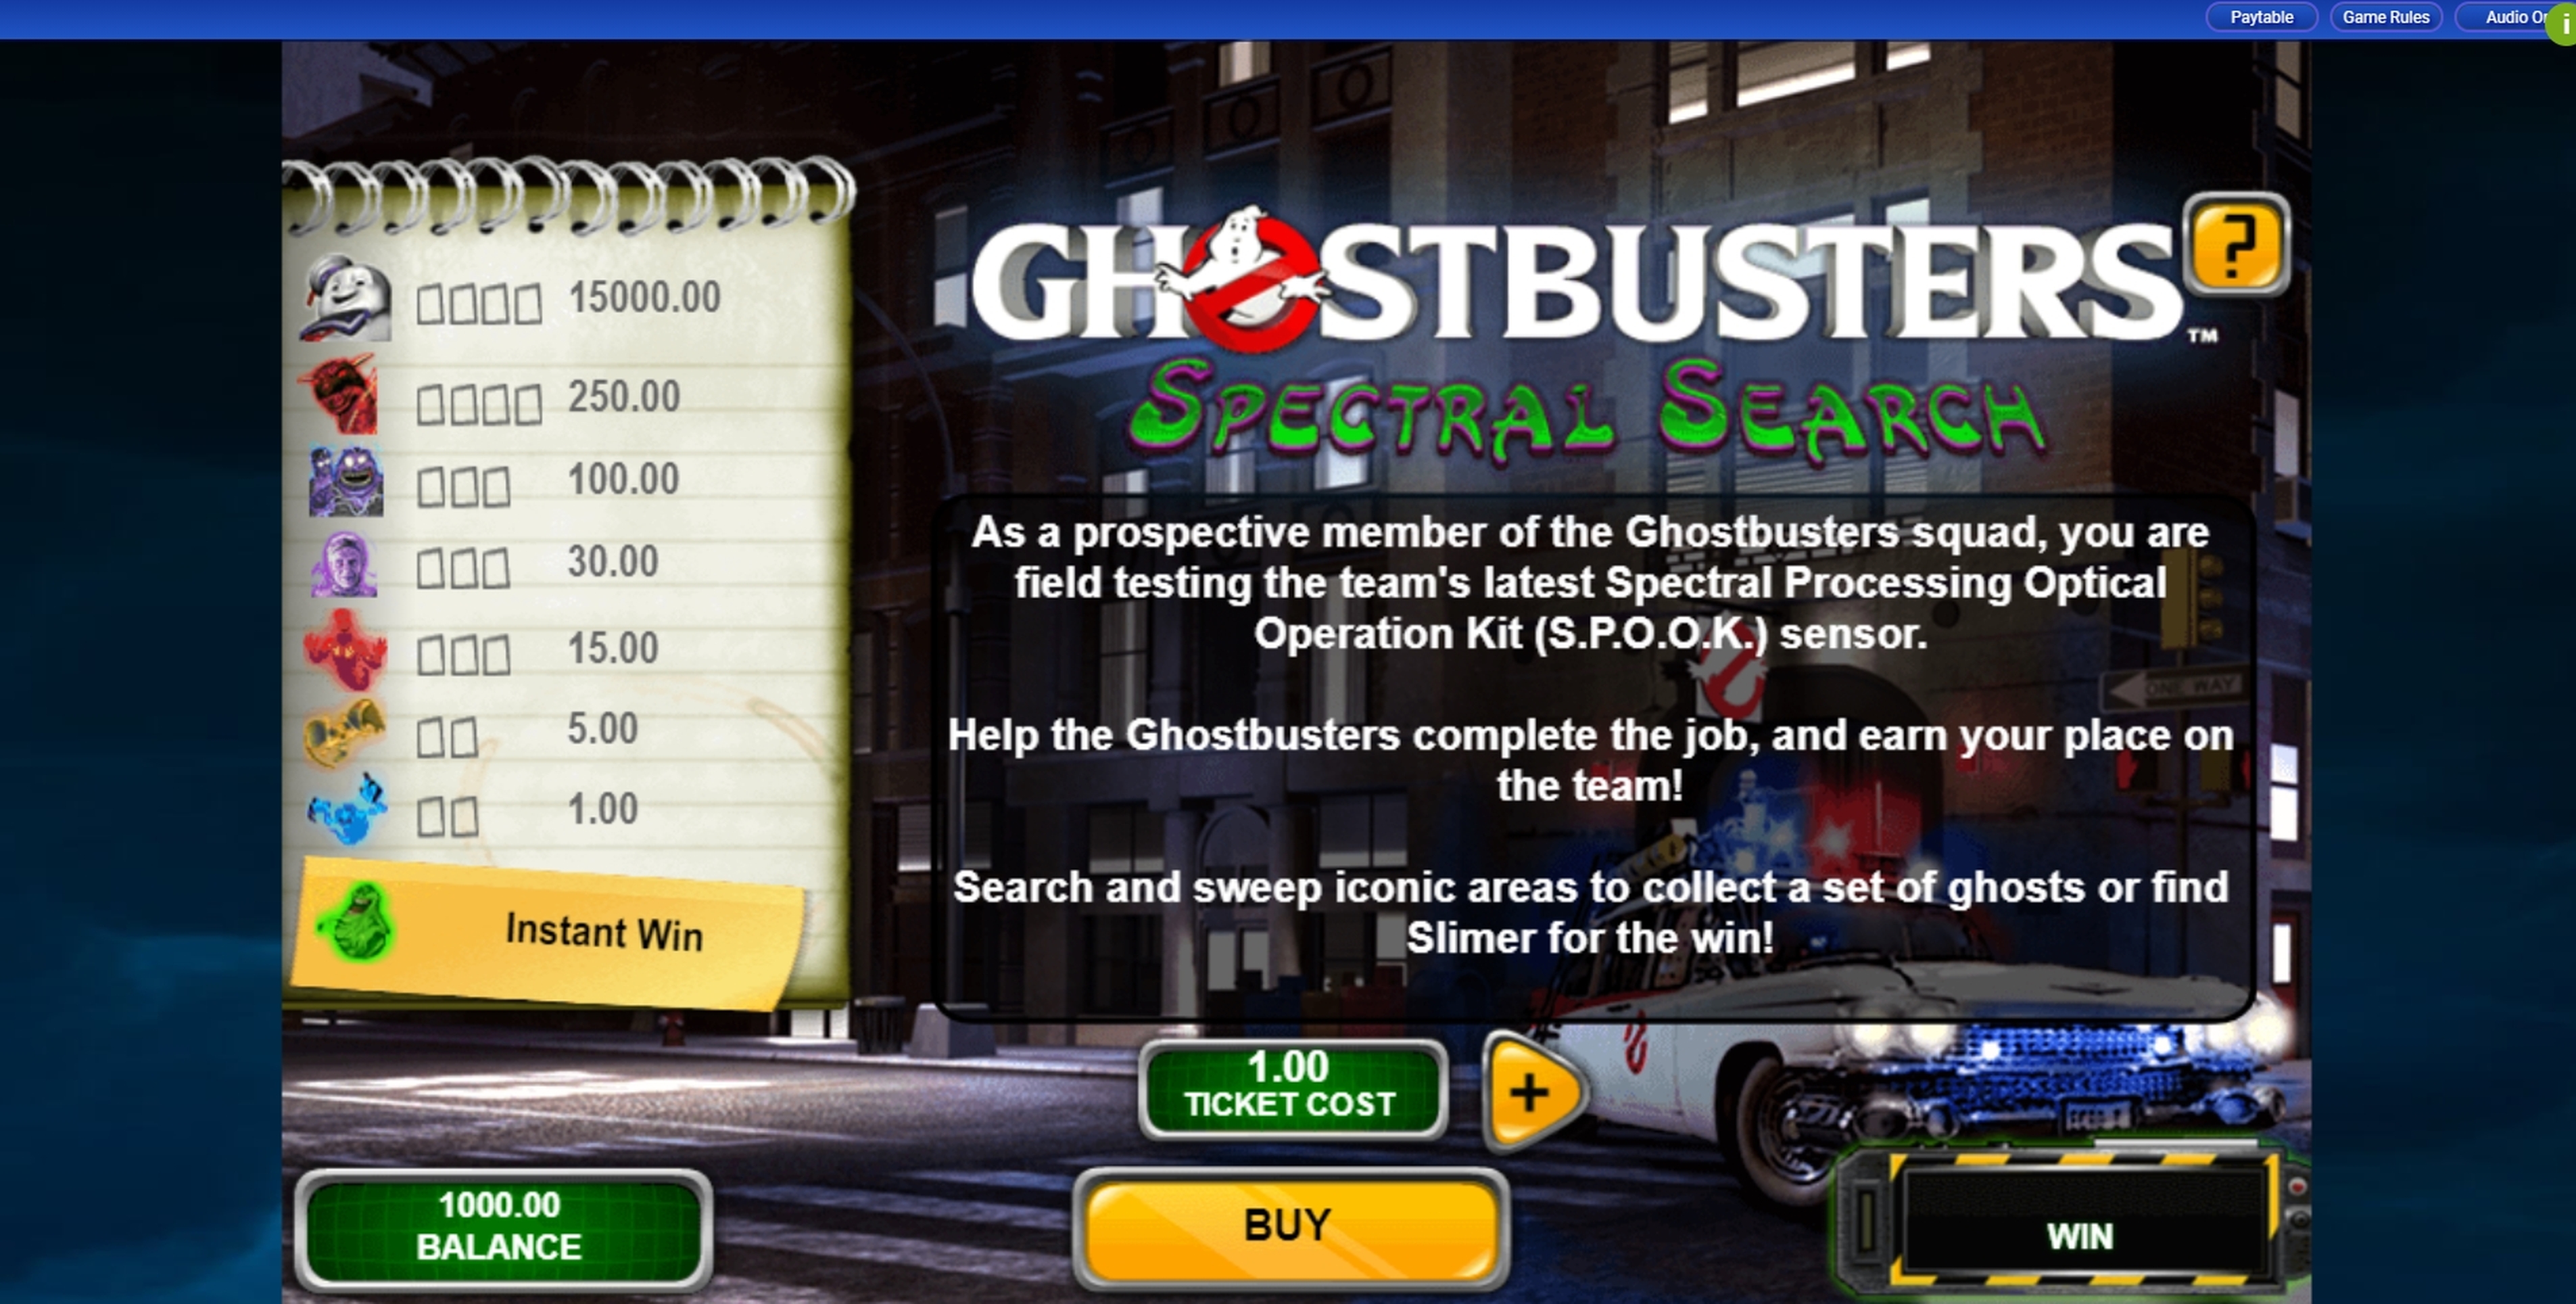 Reels in Ghostbusters Spectral Search Slot Game by IGT